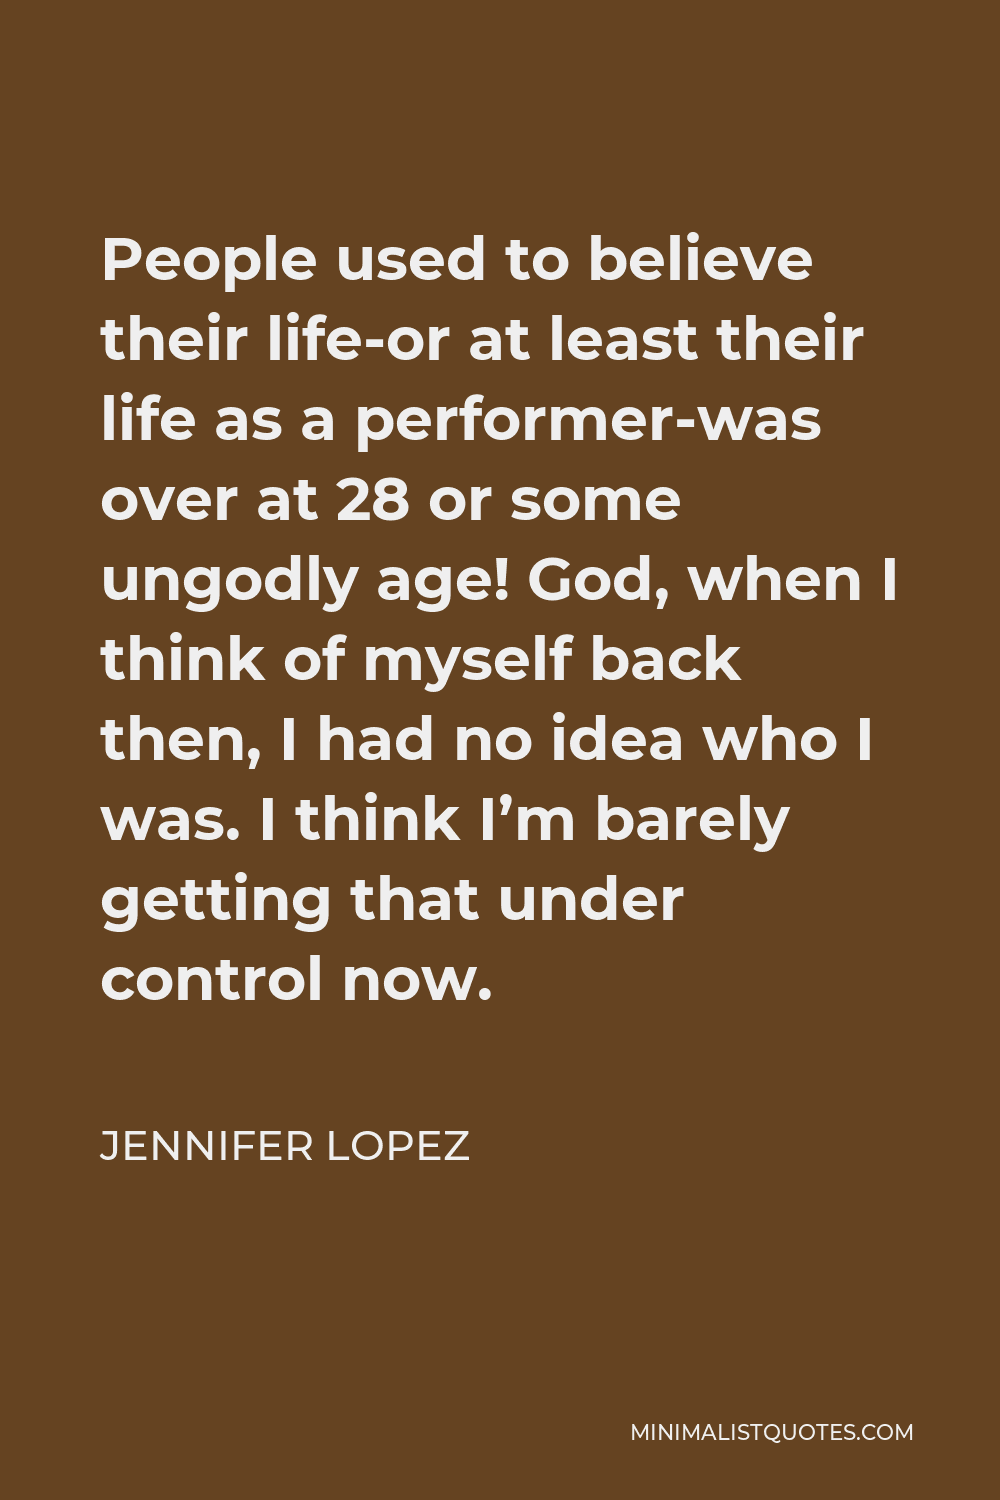 Jennifer Lopez Quote - People used to believe their life-or at least their life as a performer-was over at 28 or some ungodly age! God, when I think of myself back then, I had no idea who I was. I think I’m barely getting that under control now.